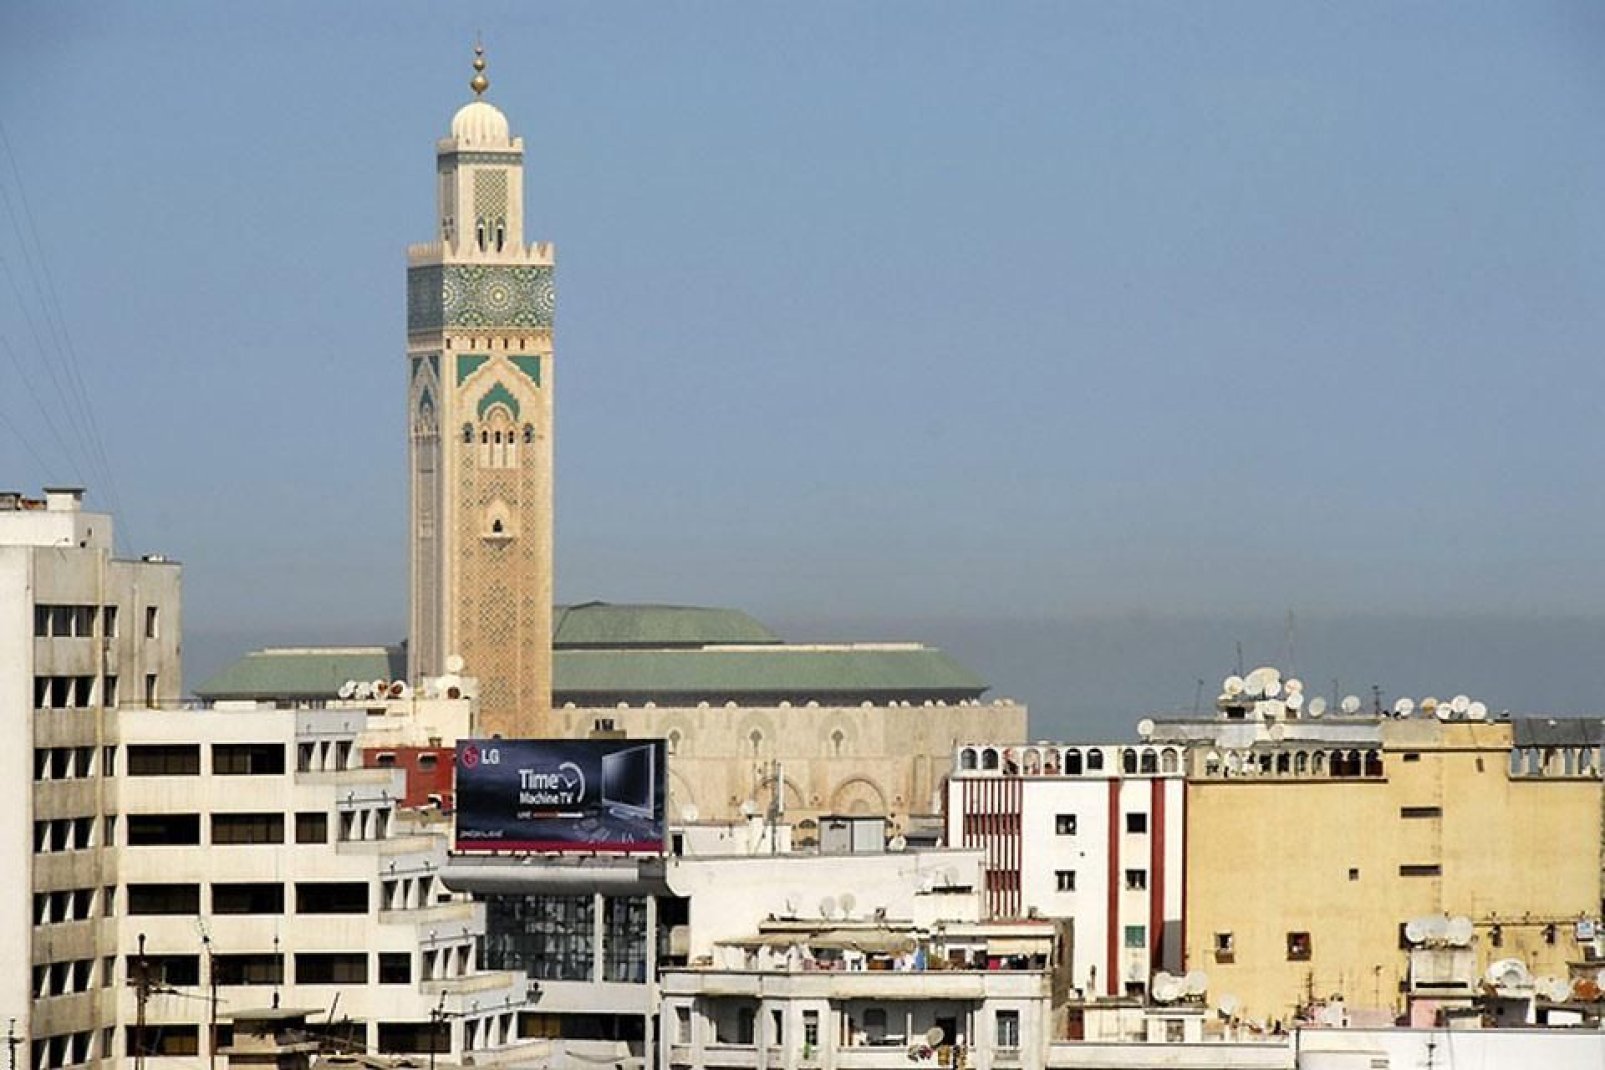 The minaret emits prayer calls, which can be heard throughout the city